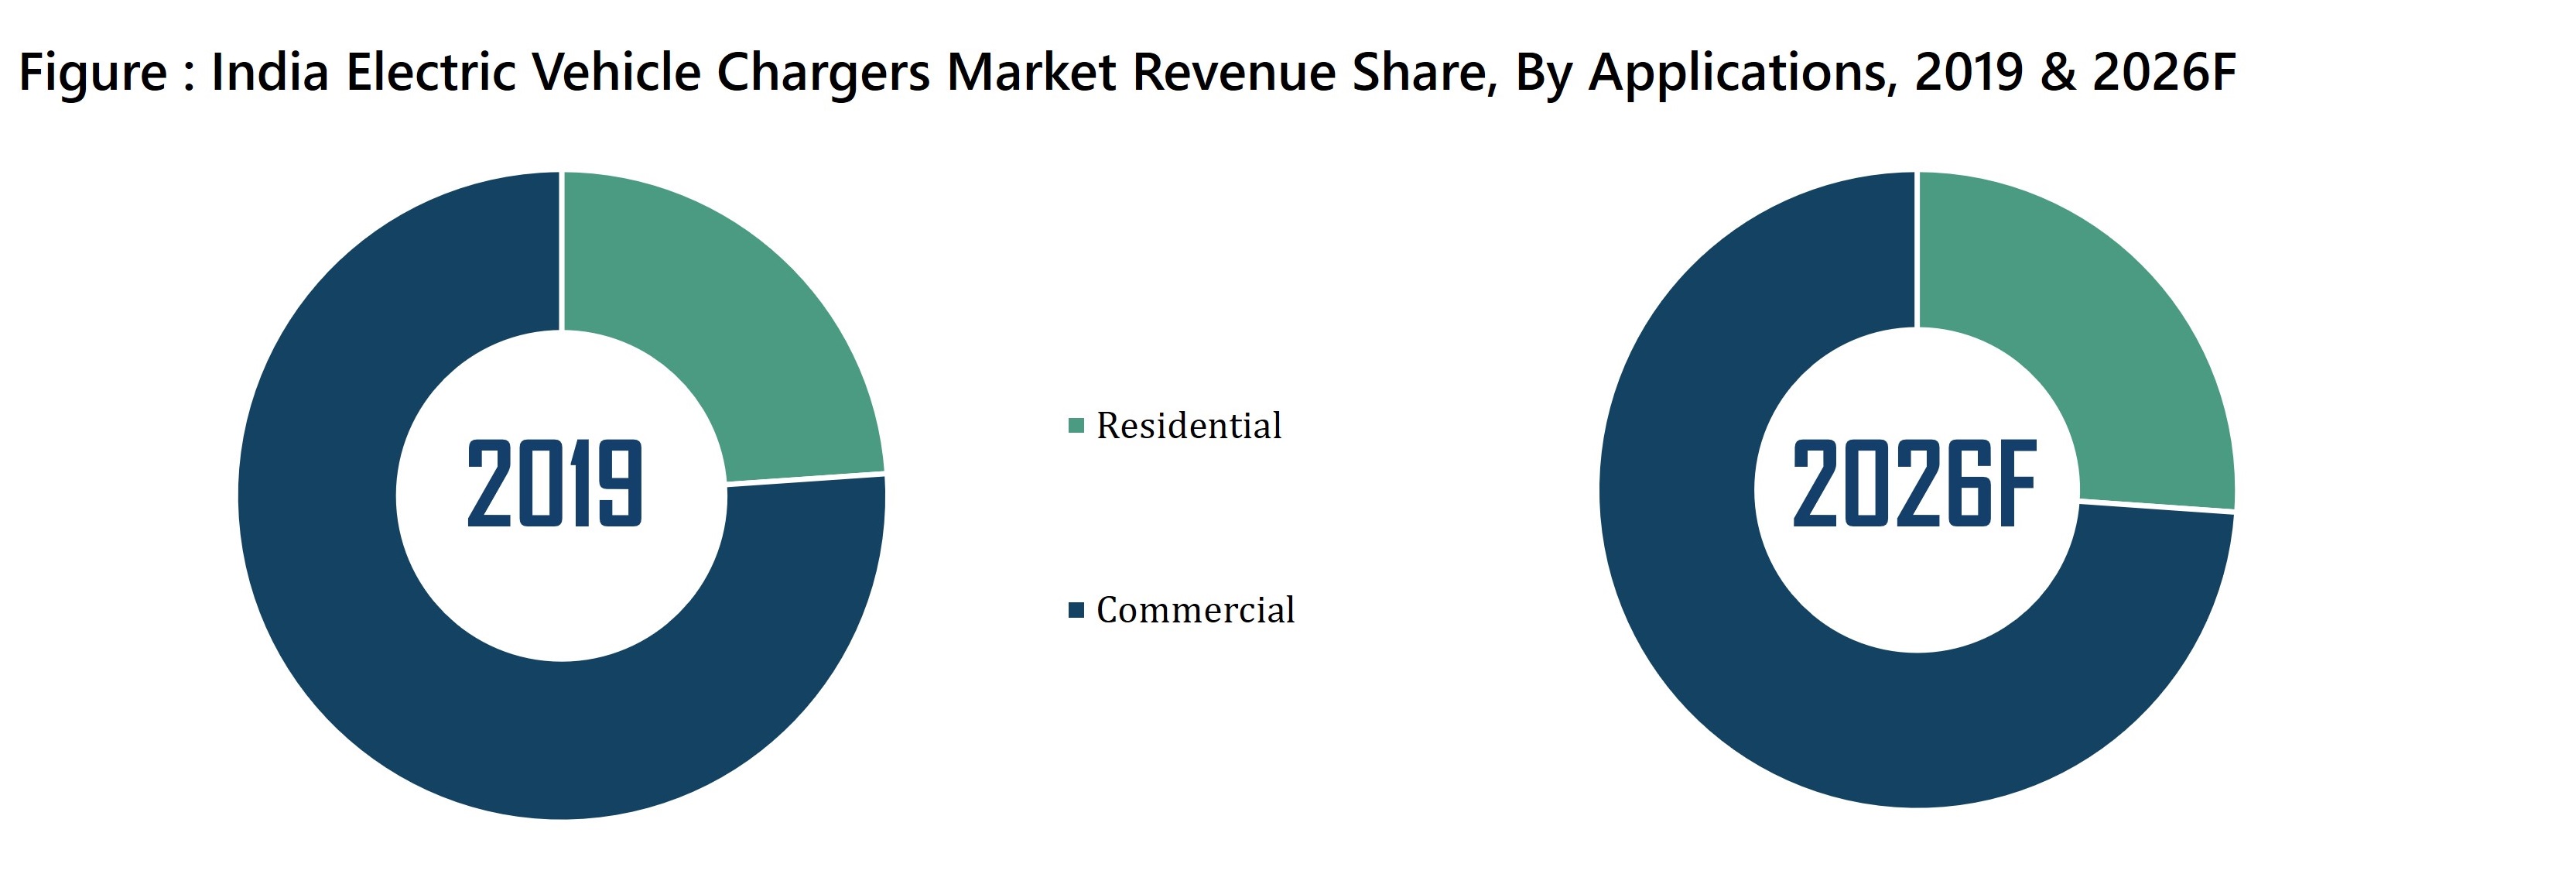 India Electric Vehicle Chargers Market Revenue Share